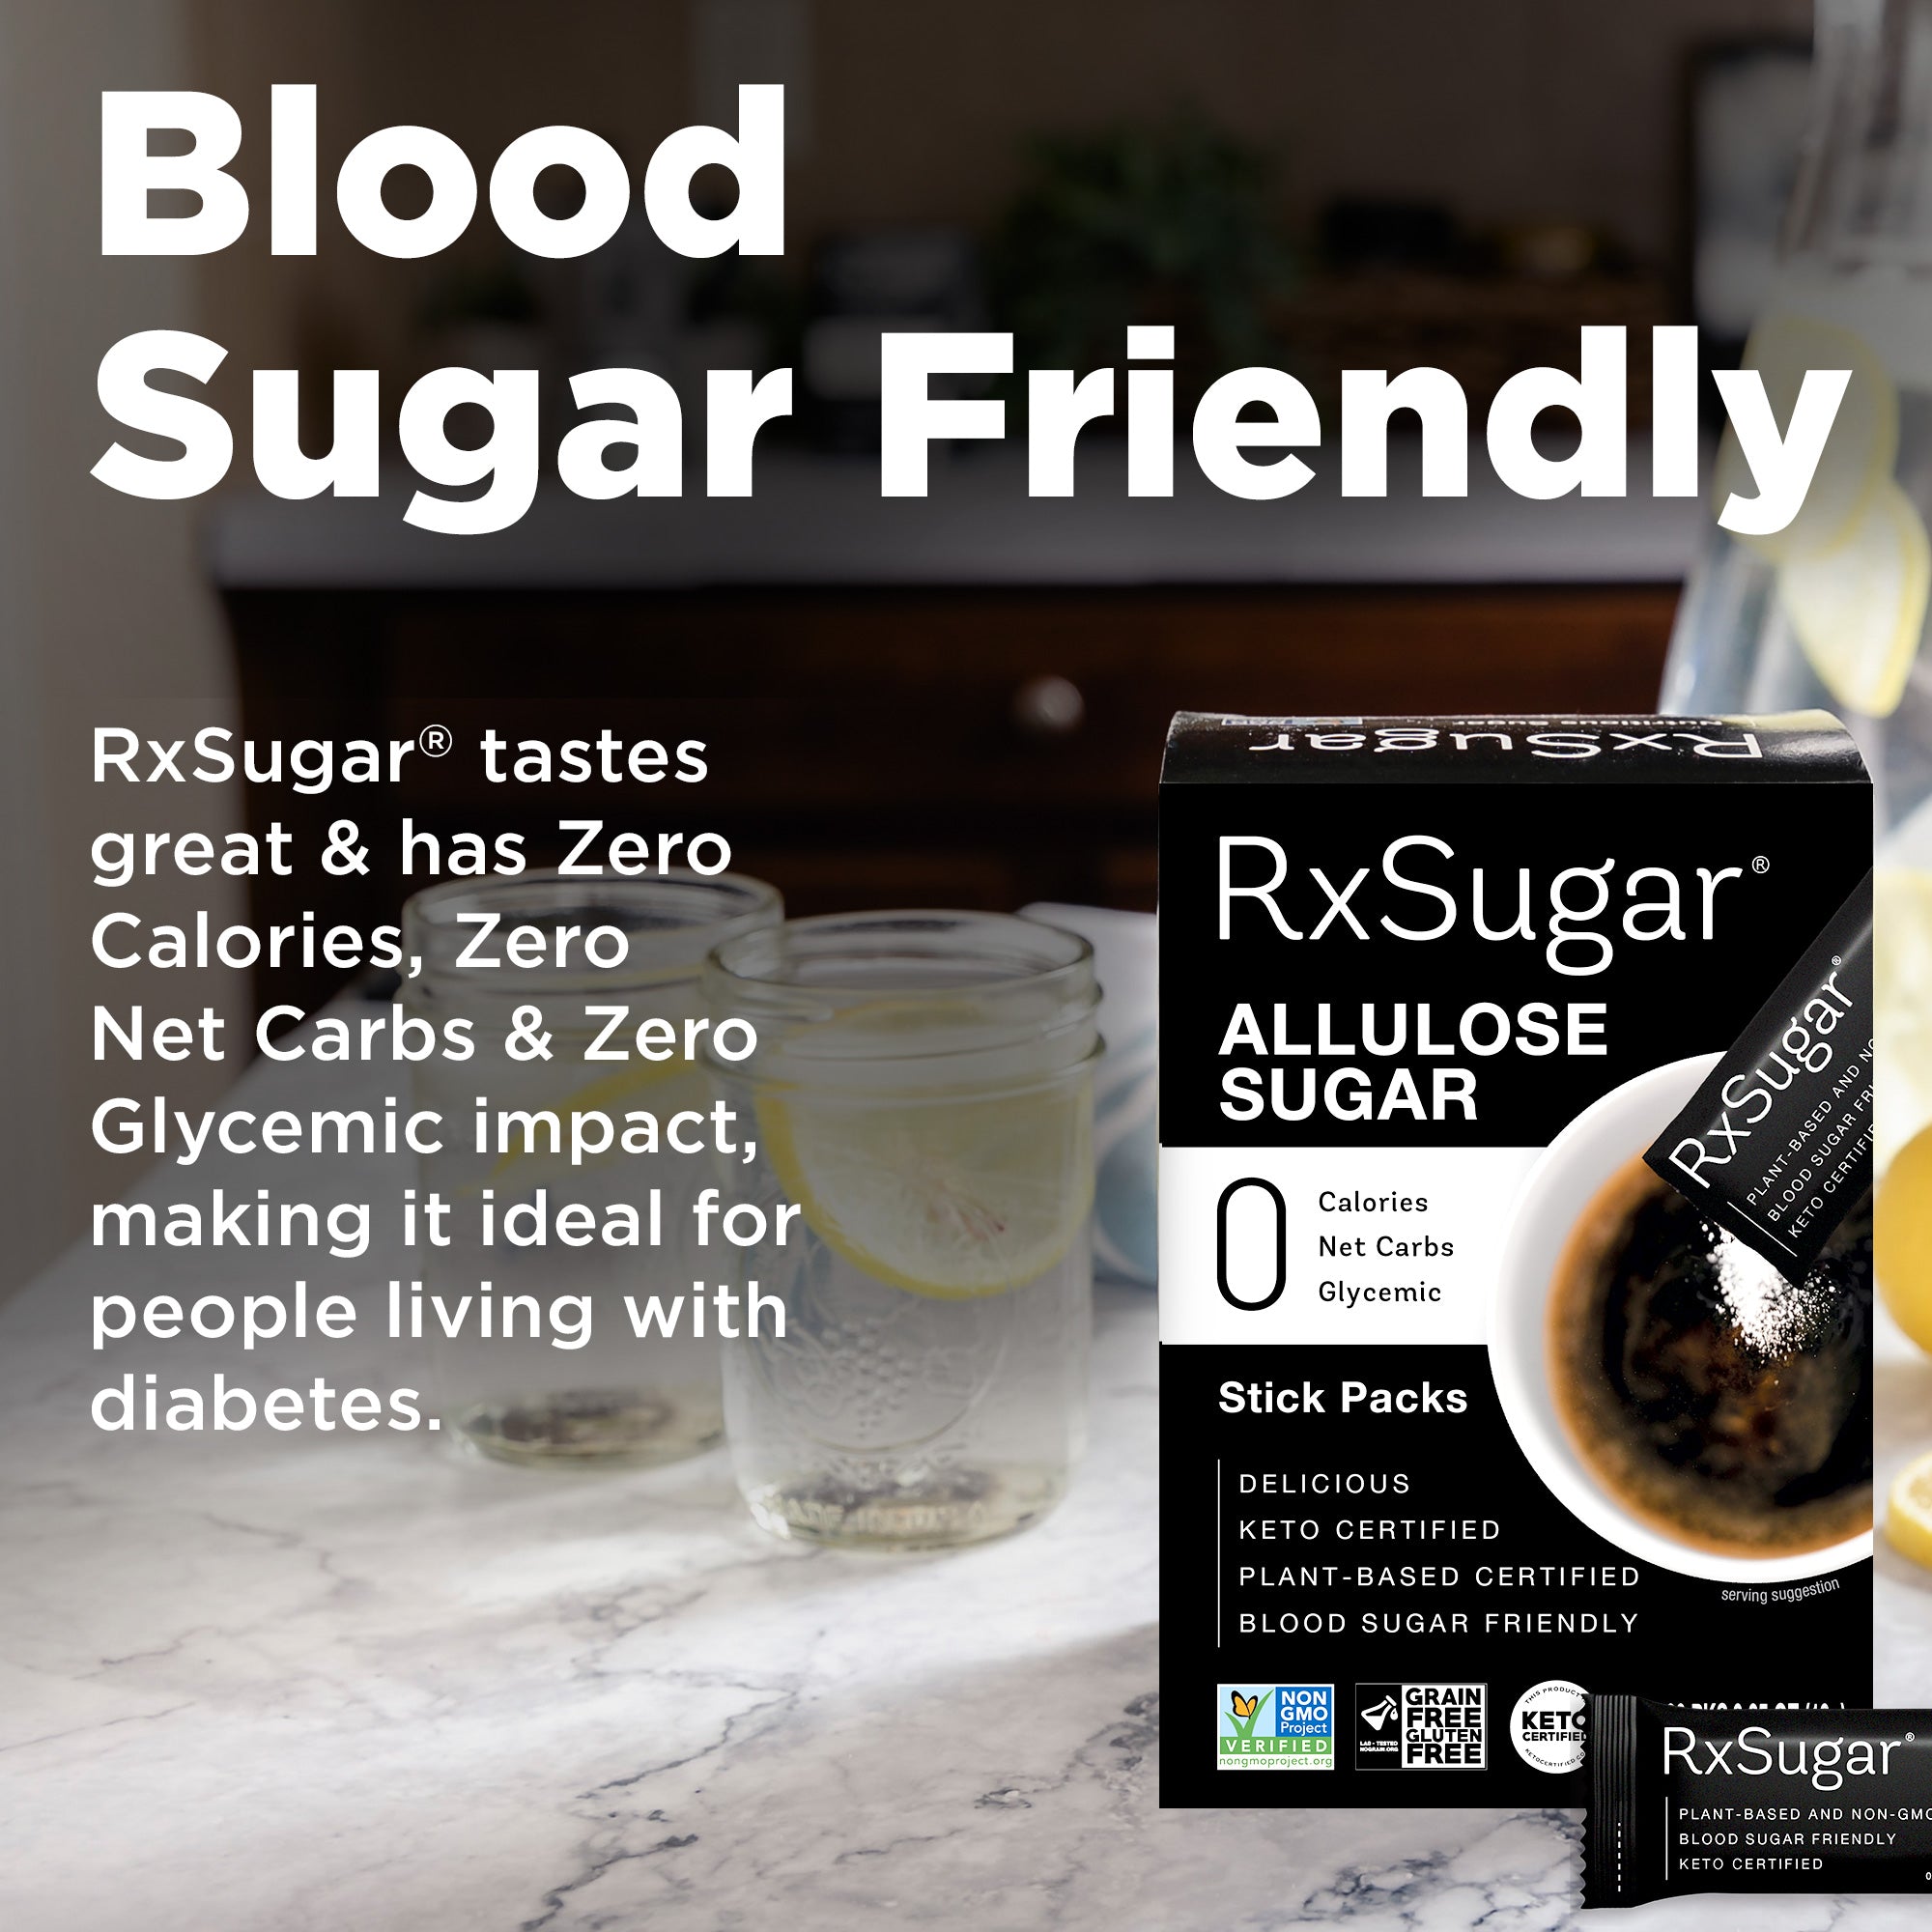 Blood Sugar Friendly. RxSugar tastes great, has zero calories, zero net carbs, and zero blood sugar impact. making it ideal for people living with diabetes. RxSugar stick pack carton with lemonade